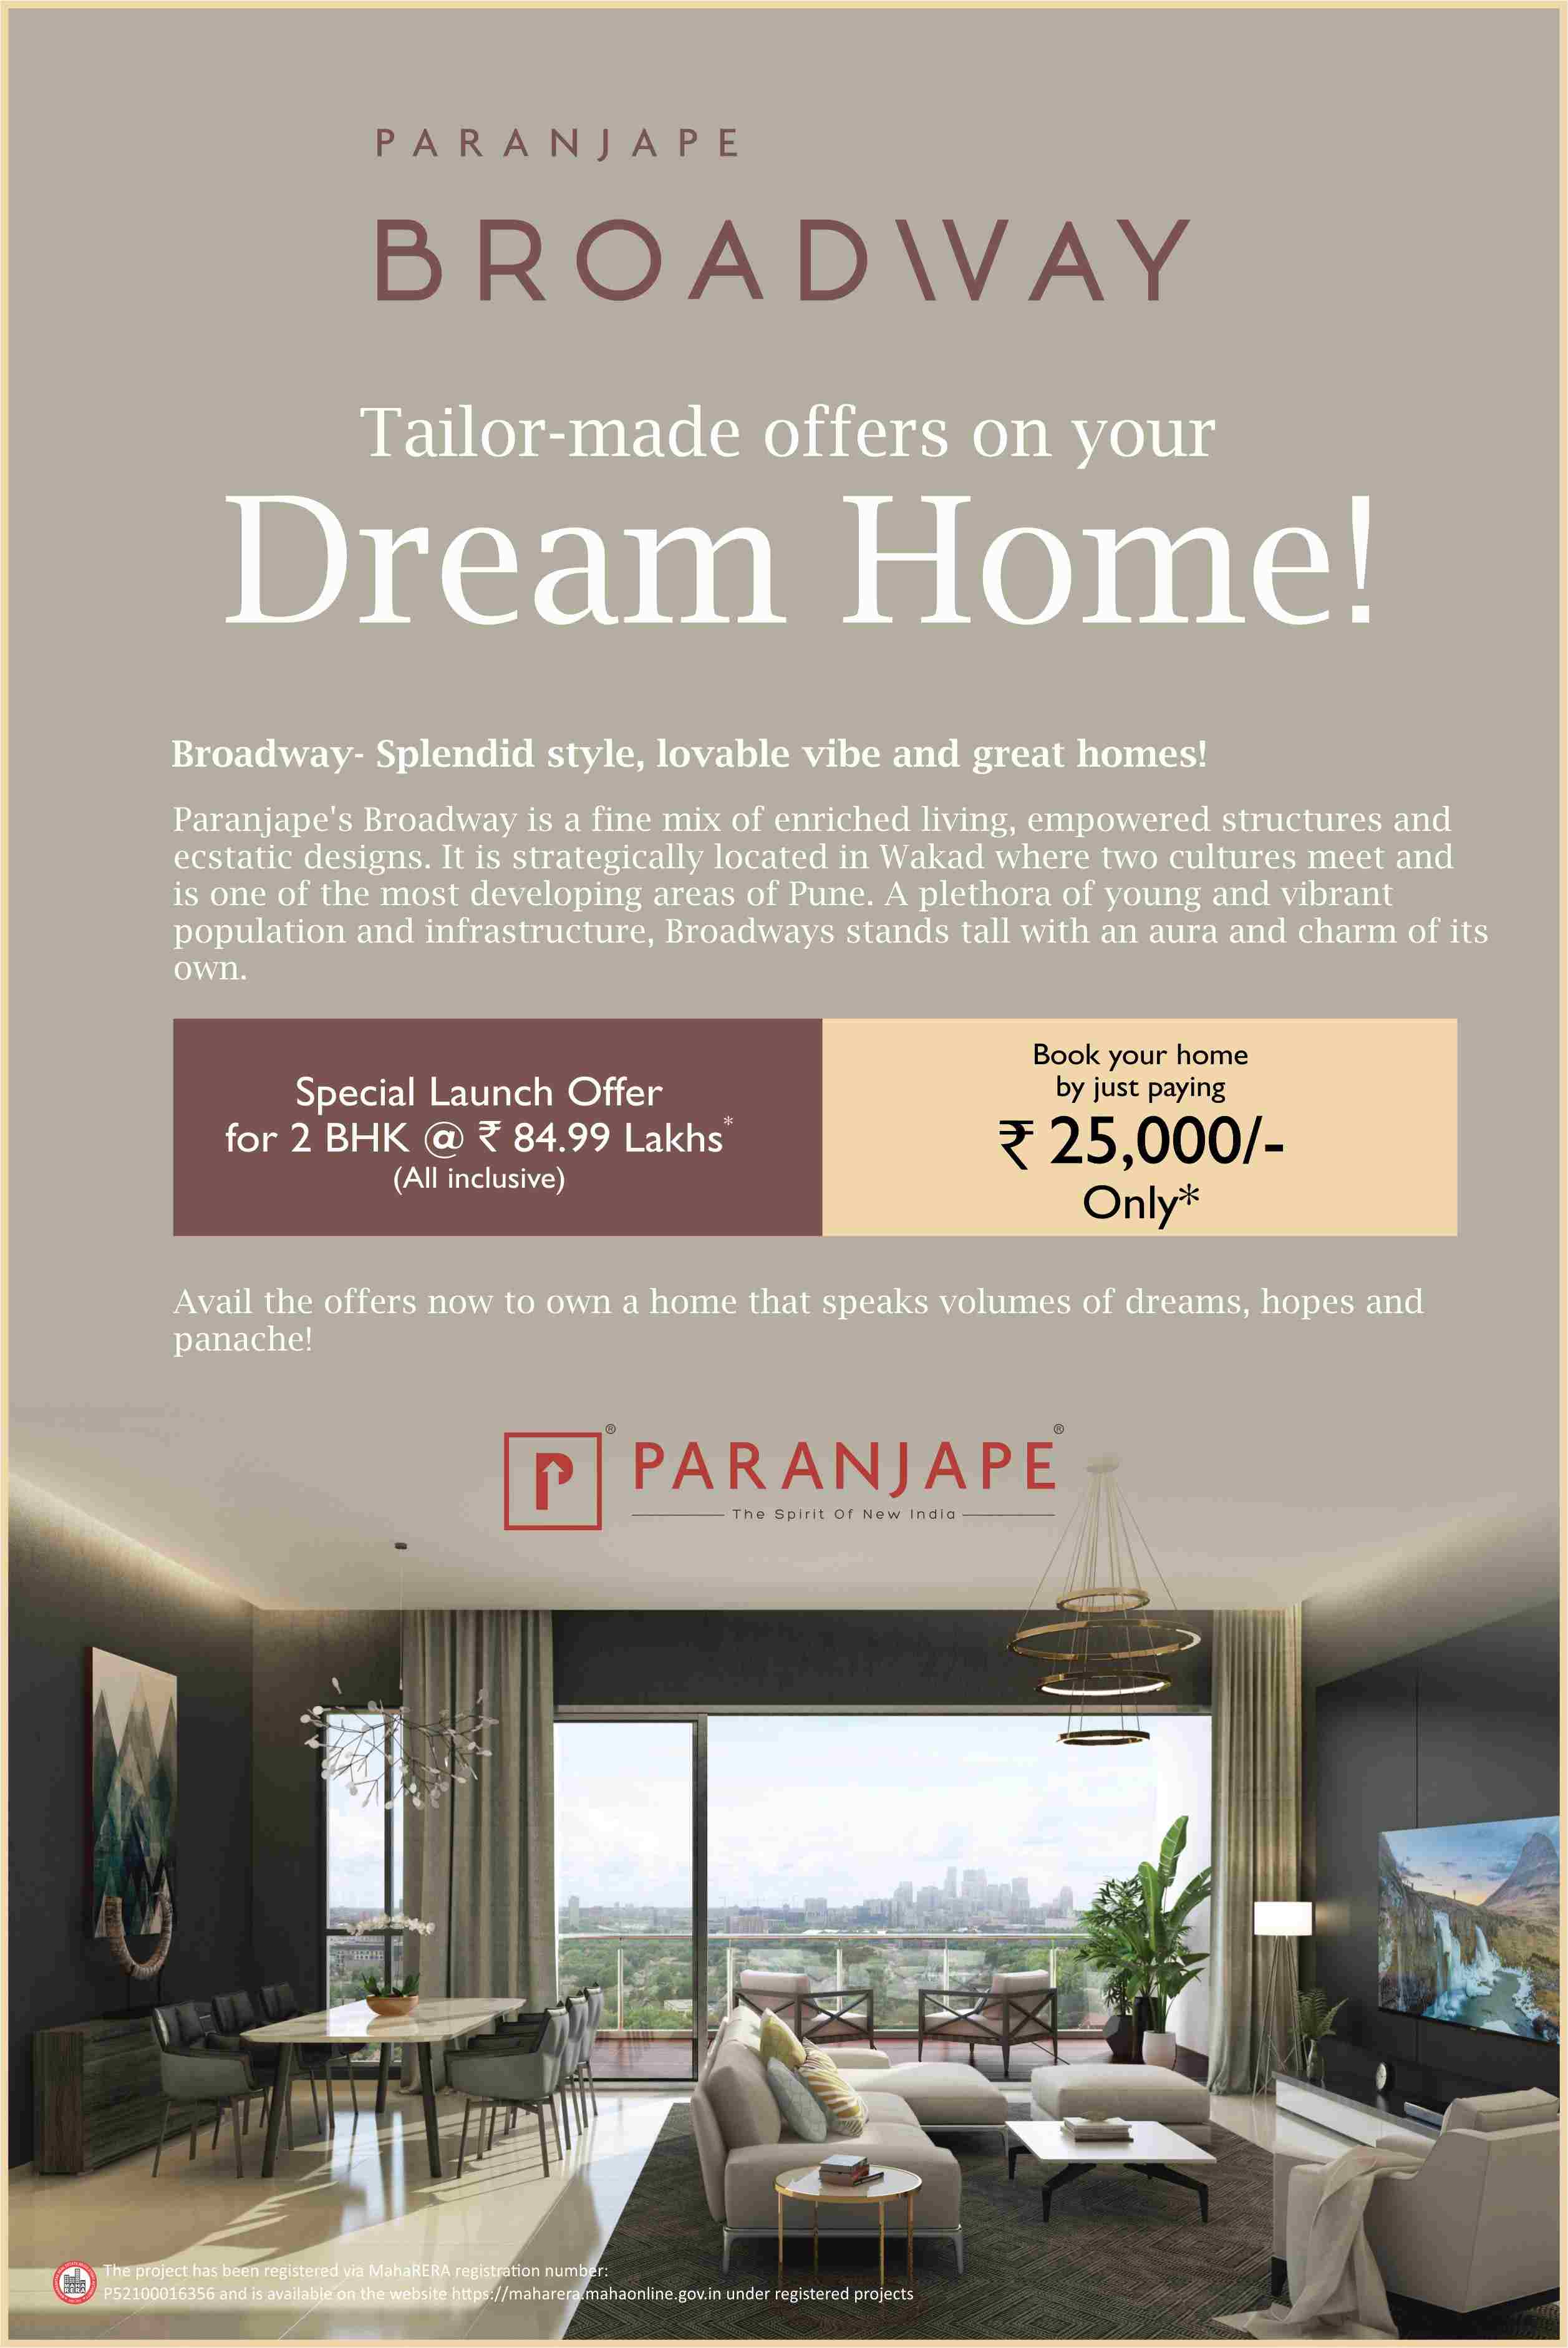 Book your home by just paying Rs 25000 at Paranjape Broadway in Wakad, Pune Update